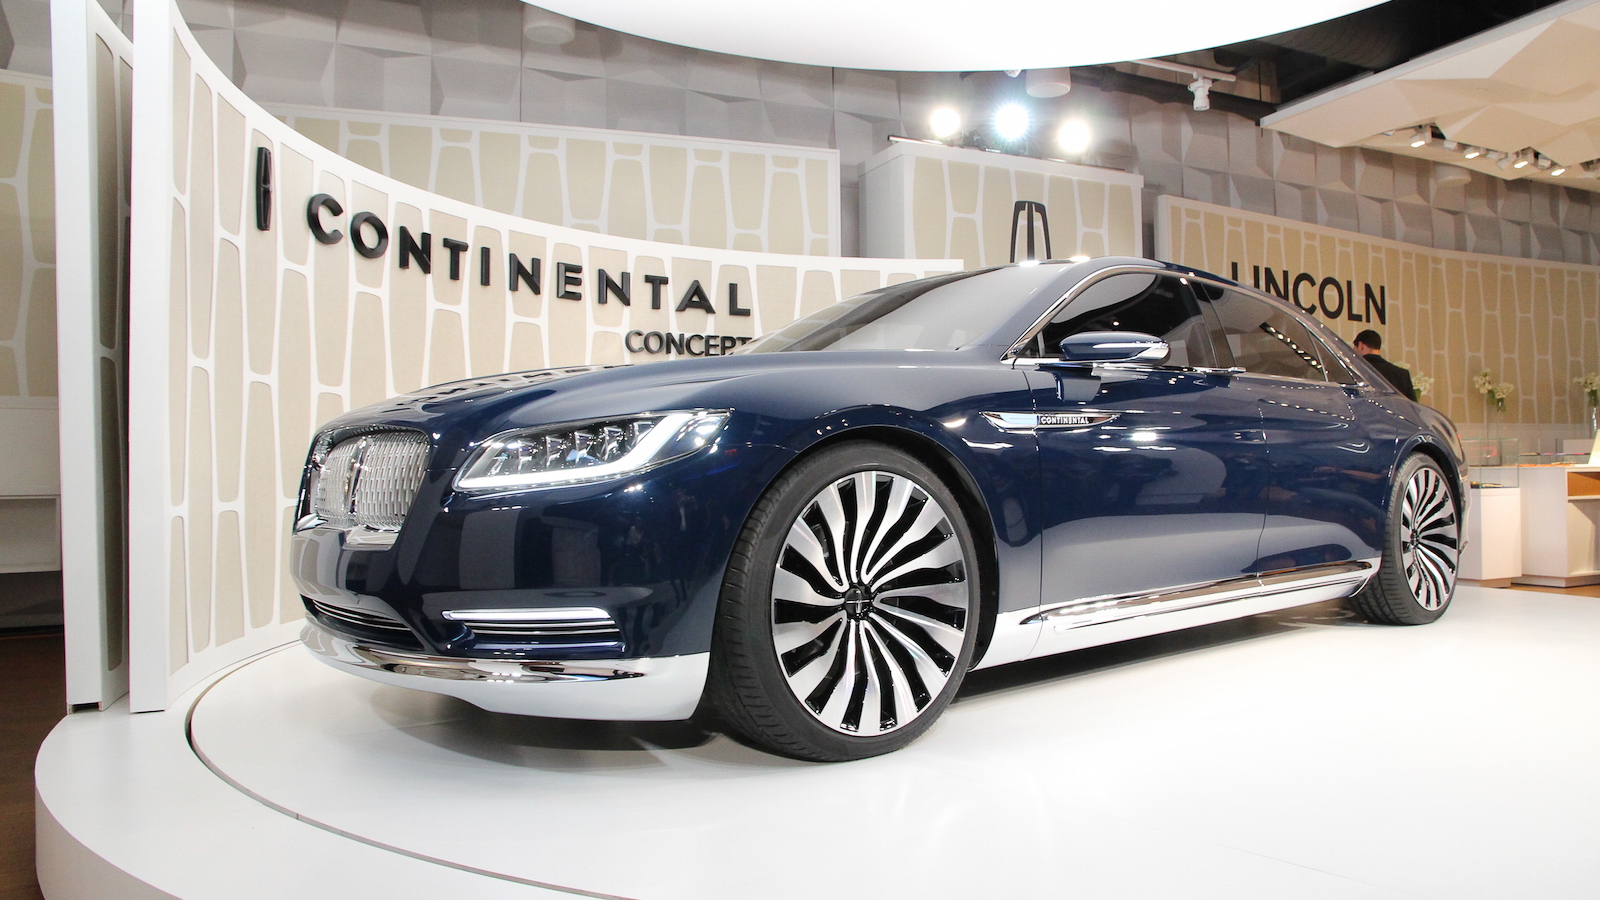 Lincoln Continental concept unveiling, New York City, March 29, 2015